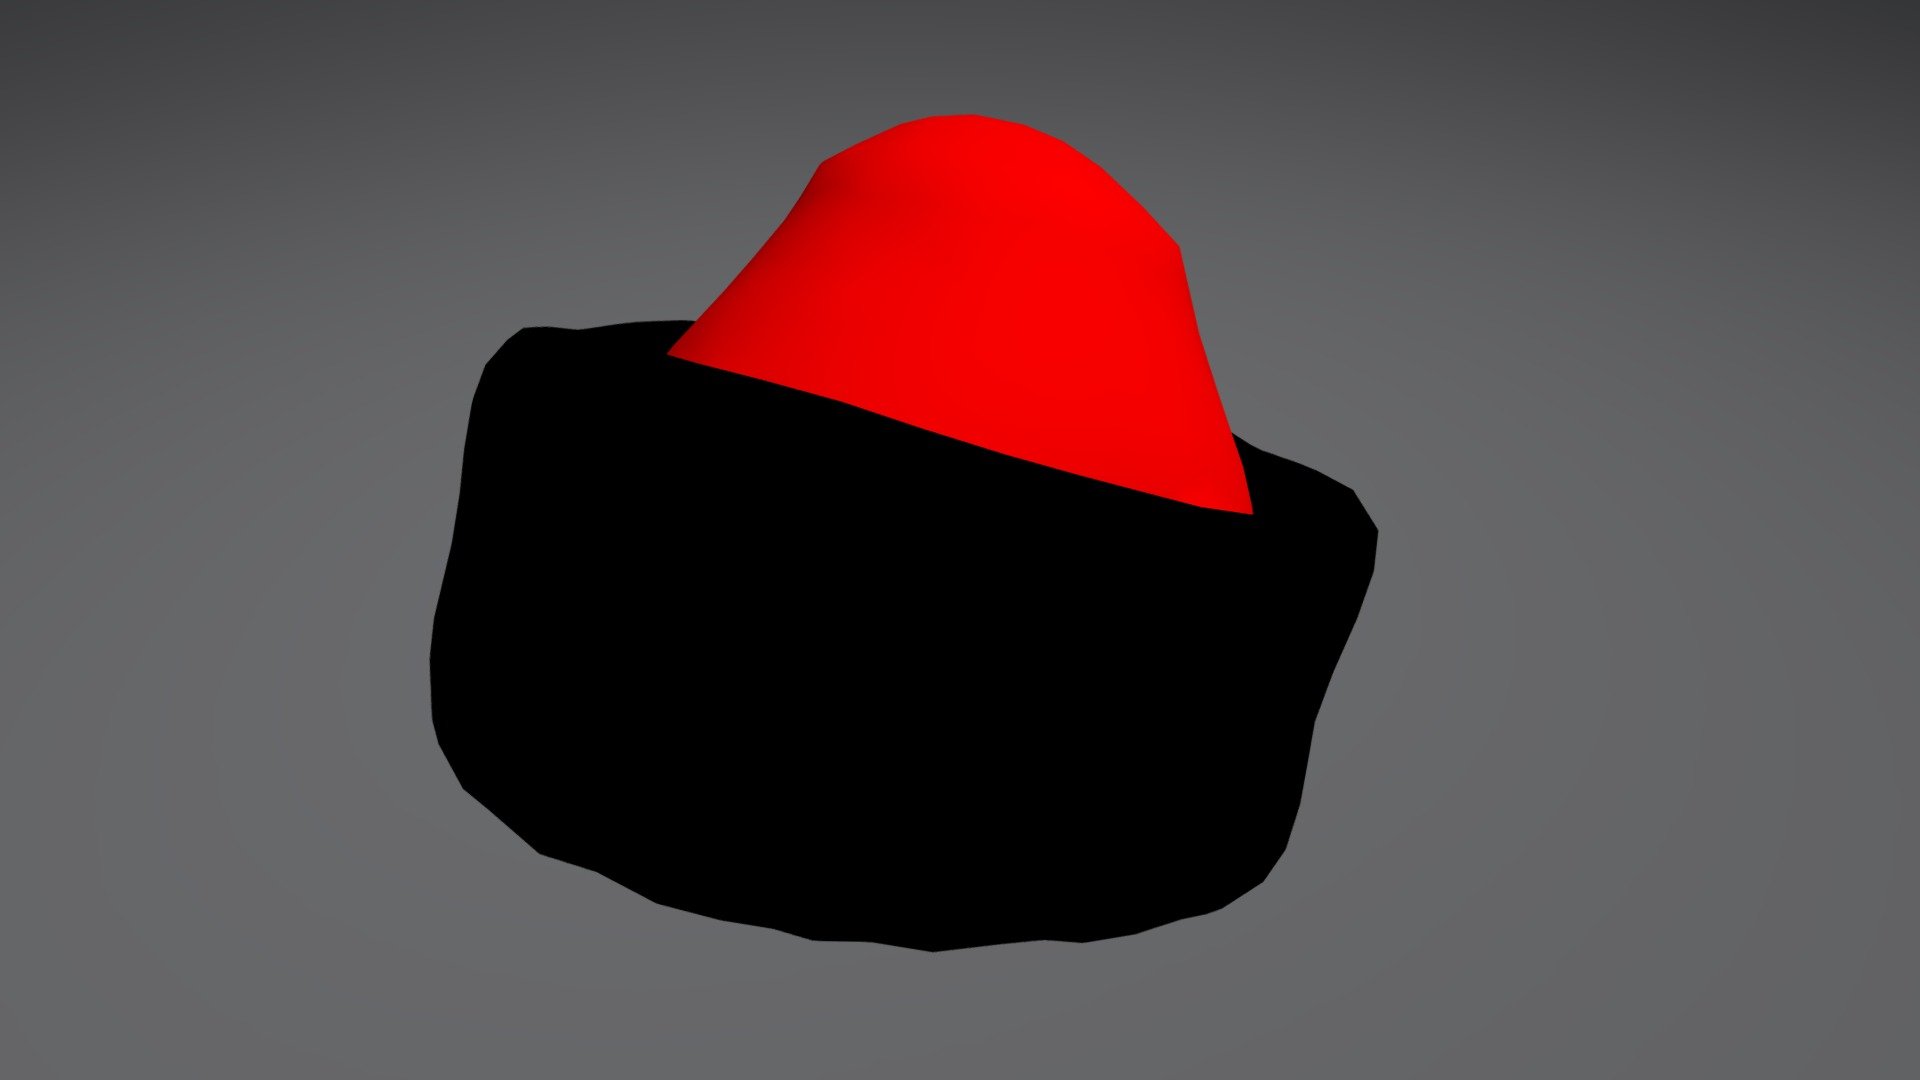 Papakha, is a wool hat worn by men throughout the Caucasus and also in uniformed regiments in the region and beyond. The word papakha is of Turkic origin (papak). In Azerbaijani, papaq translates to hat.

*1 model (low poly) with materials 3d model